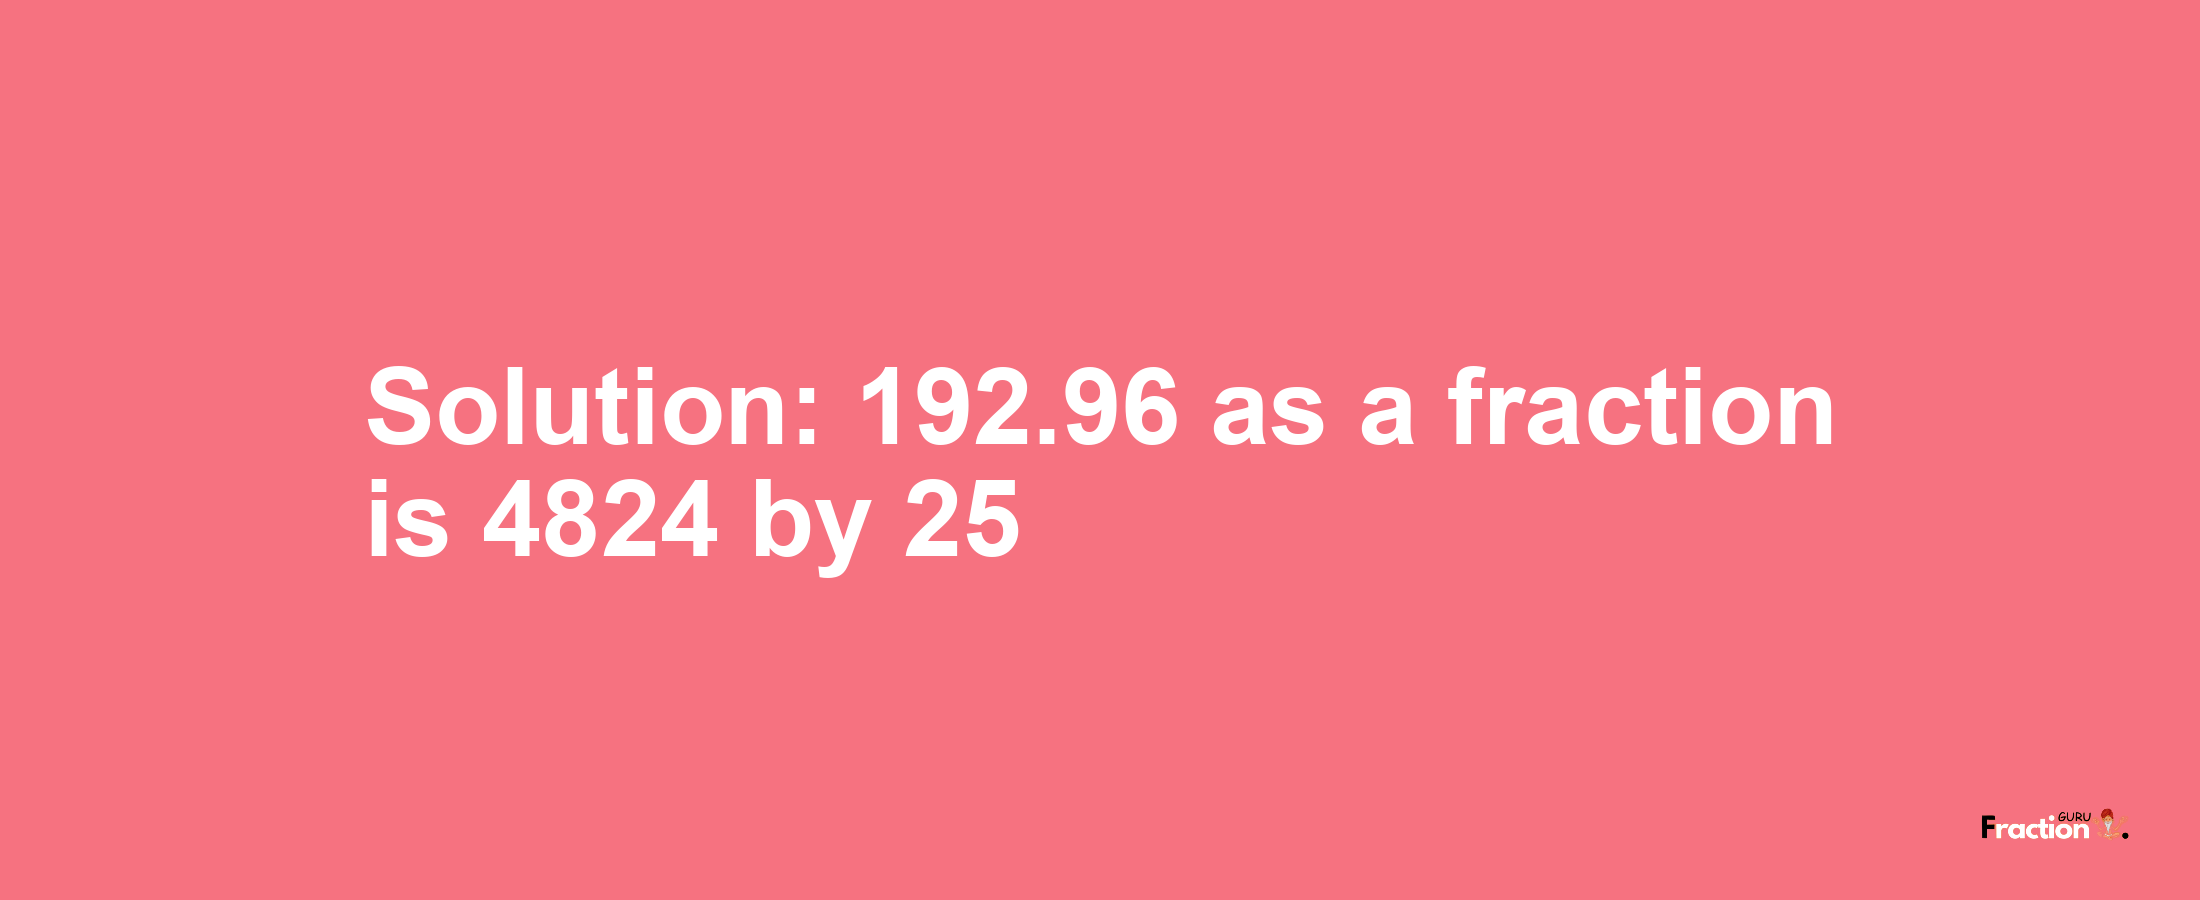 Solution:192.96 as a fraction is 4824/25